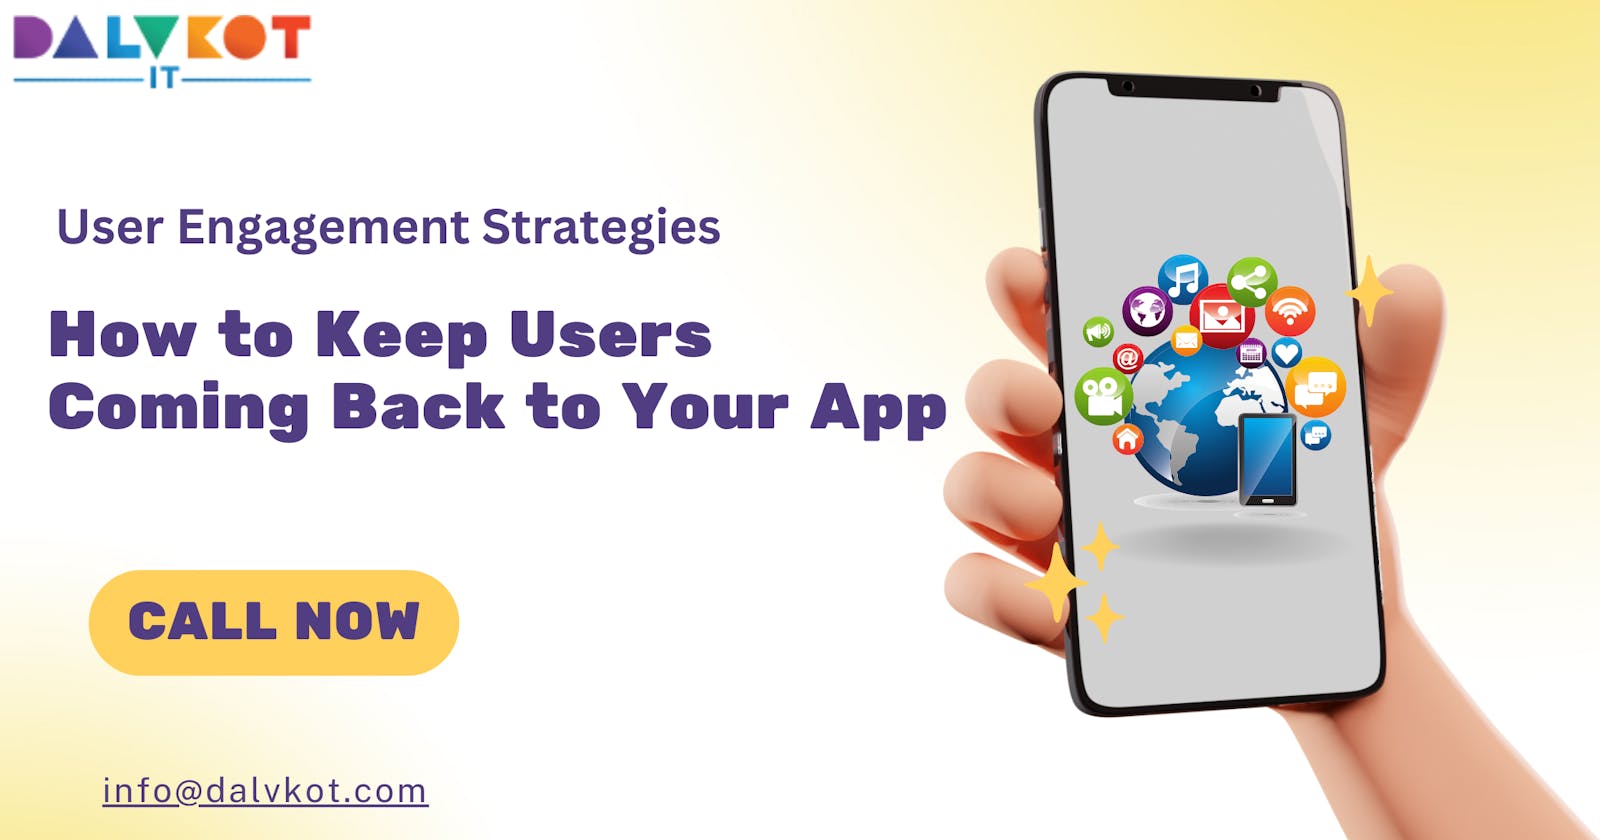 User Engagement Strategies: How to Keep Users Coming Back to Your App